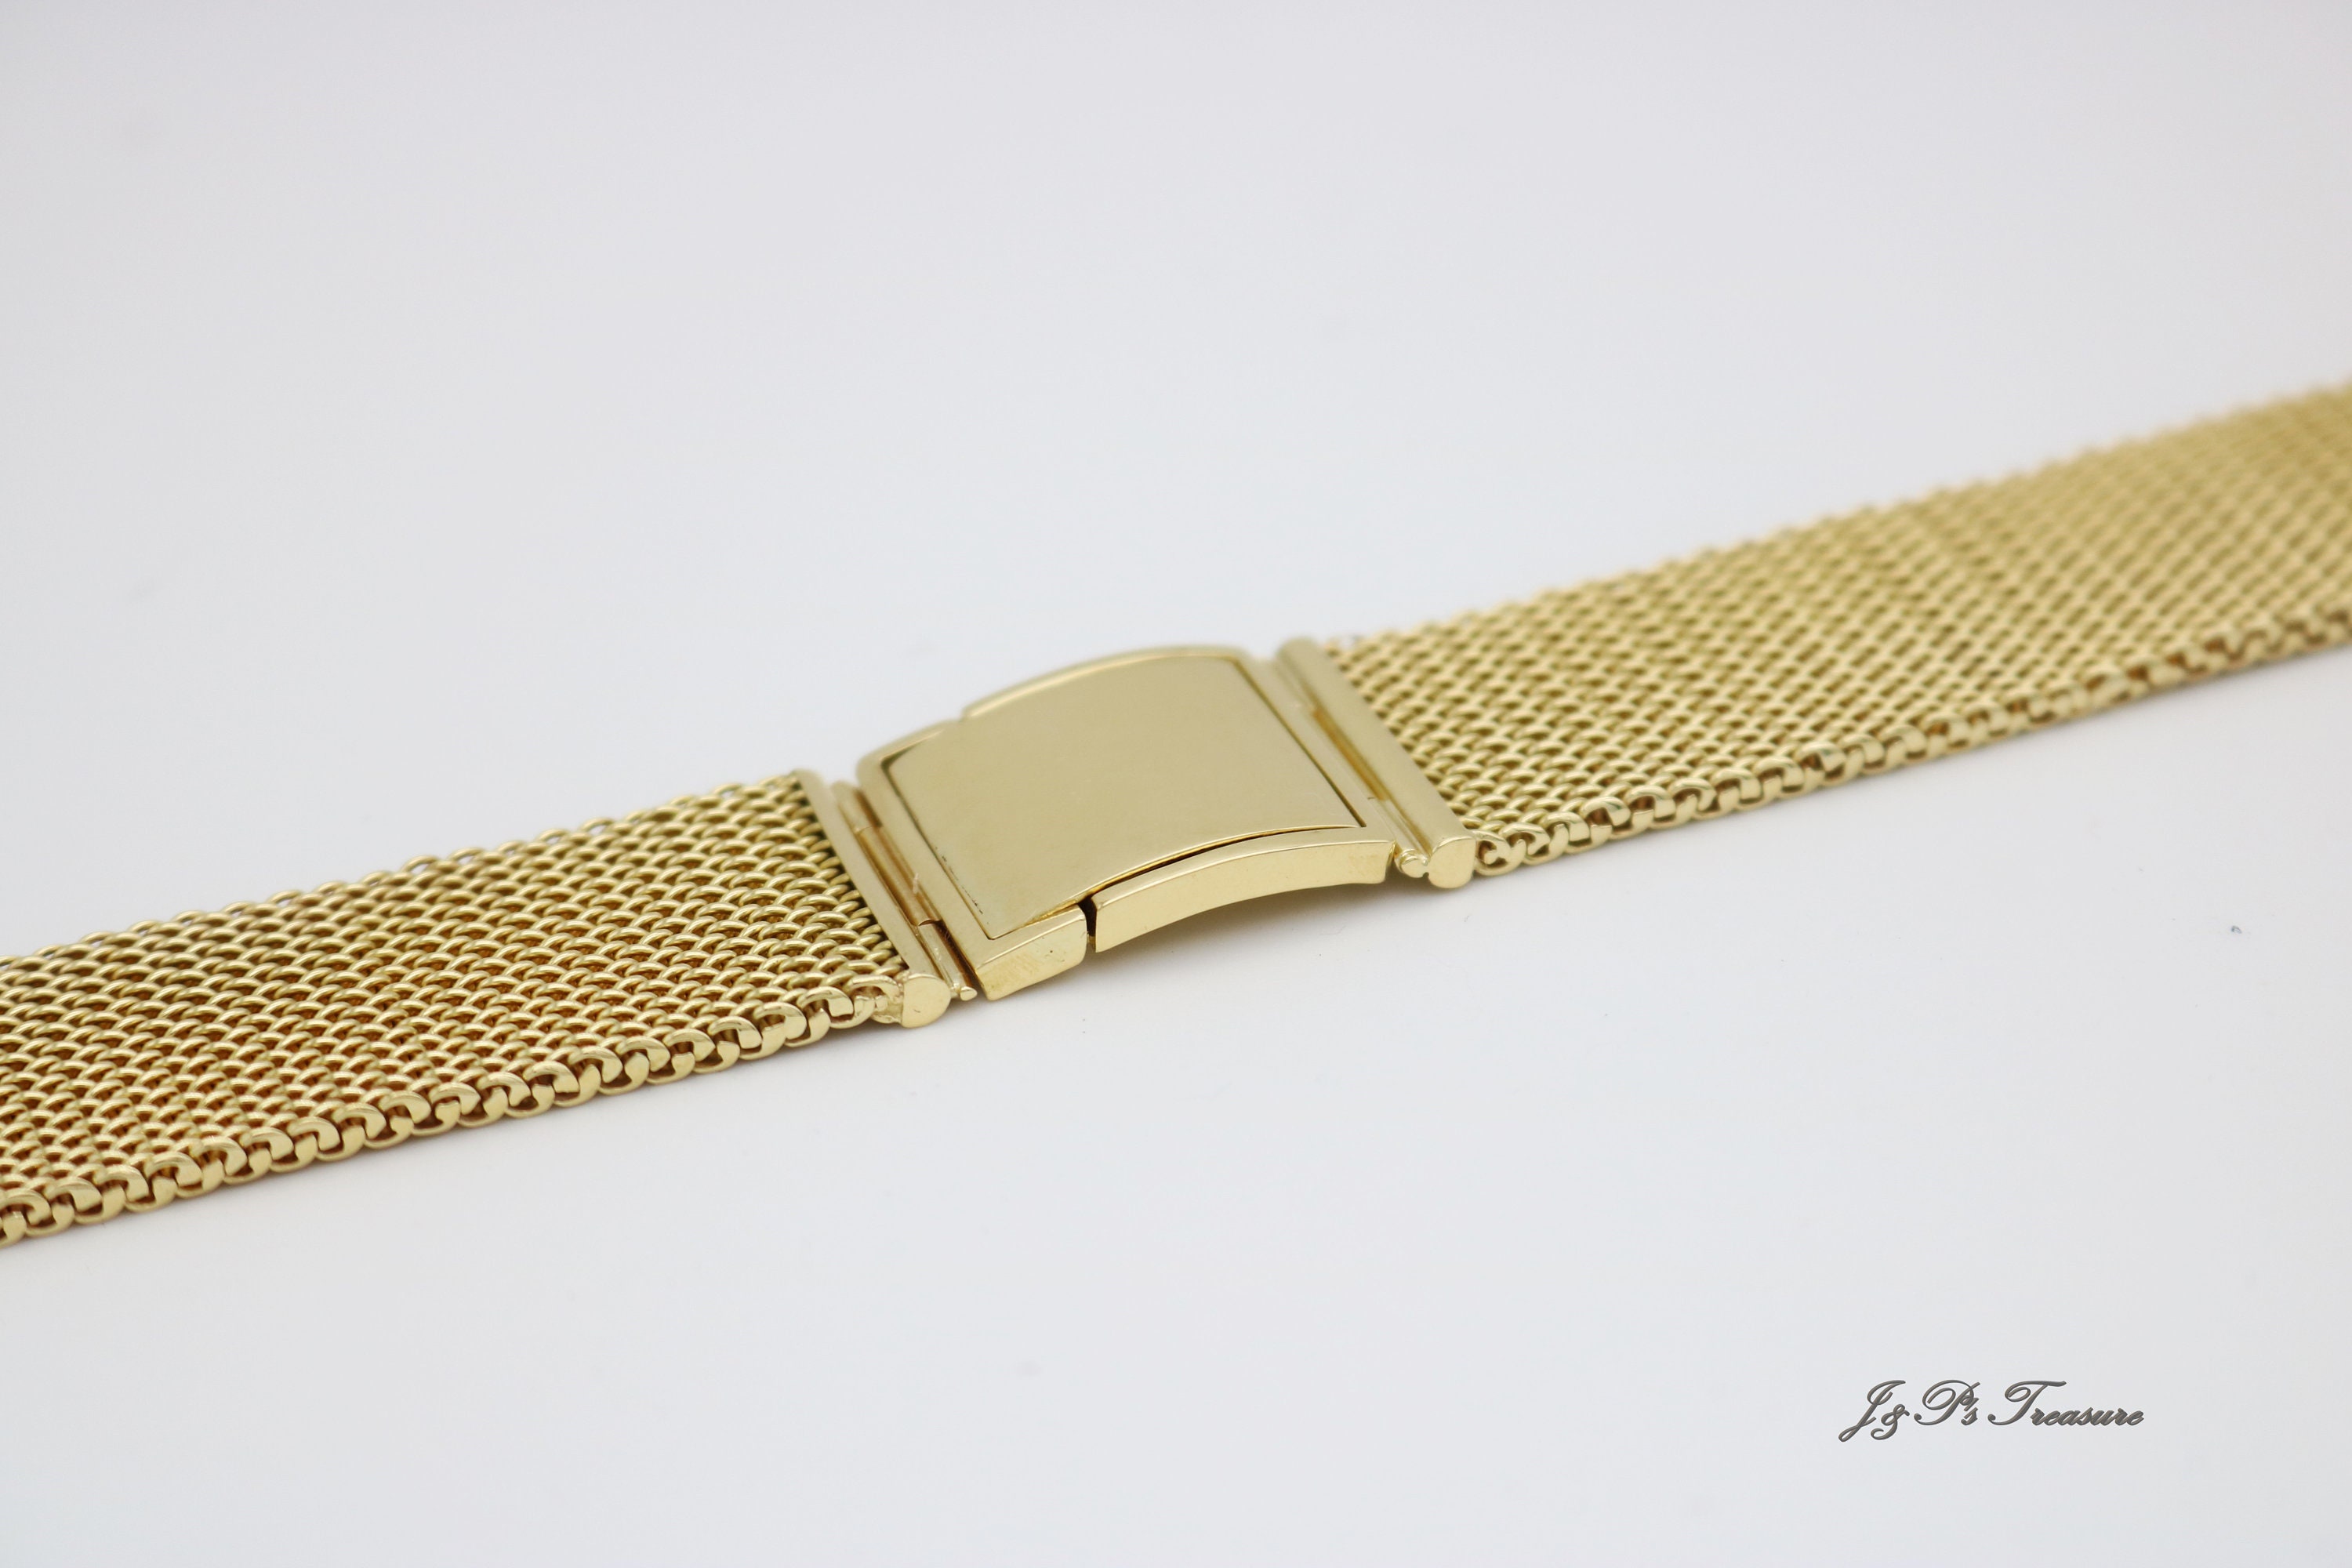 Omega Constellation 168.009 18K Yellow Gold Mens Watch for Rs.764,365 for  sale from a Trusted Seller on Chrono24